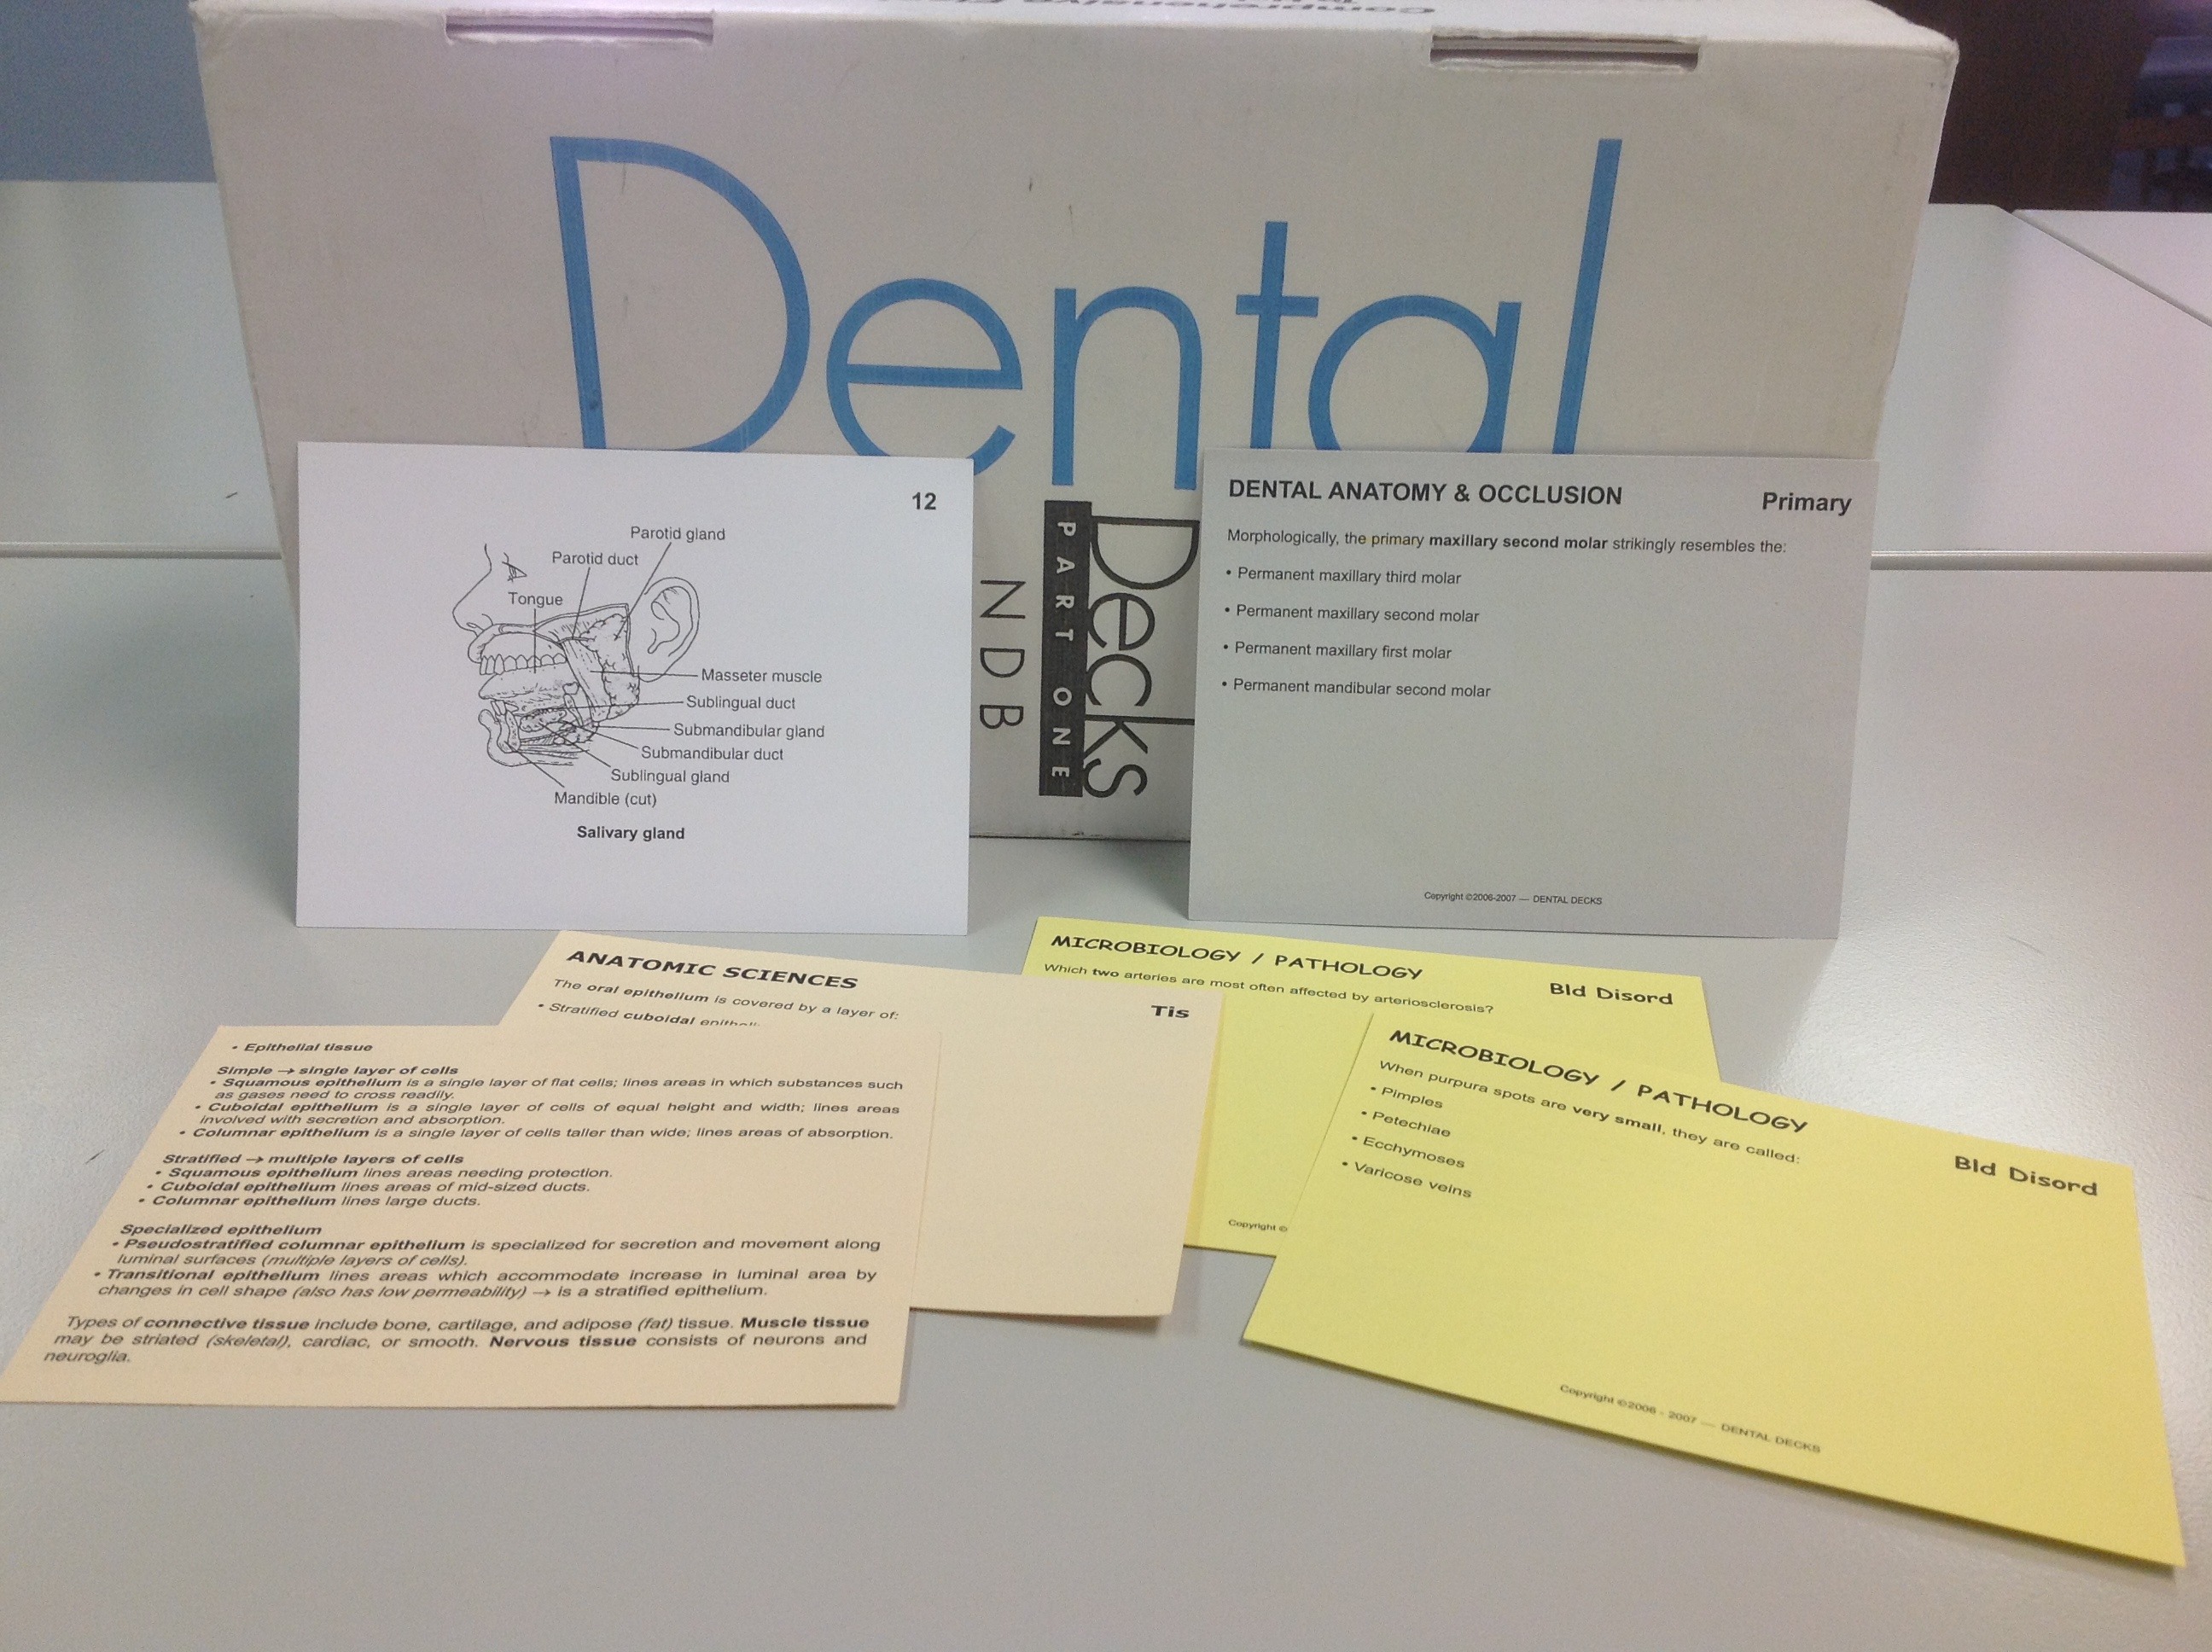 The Dental Deck is a flash card system for dental students.